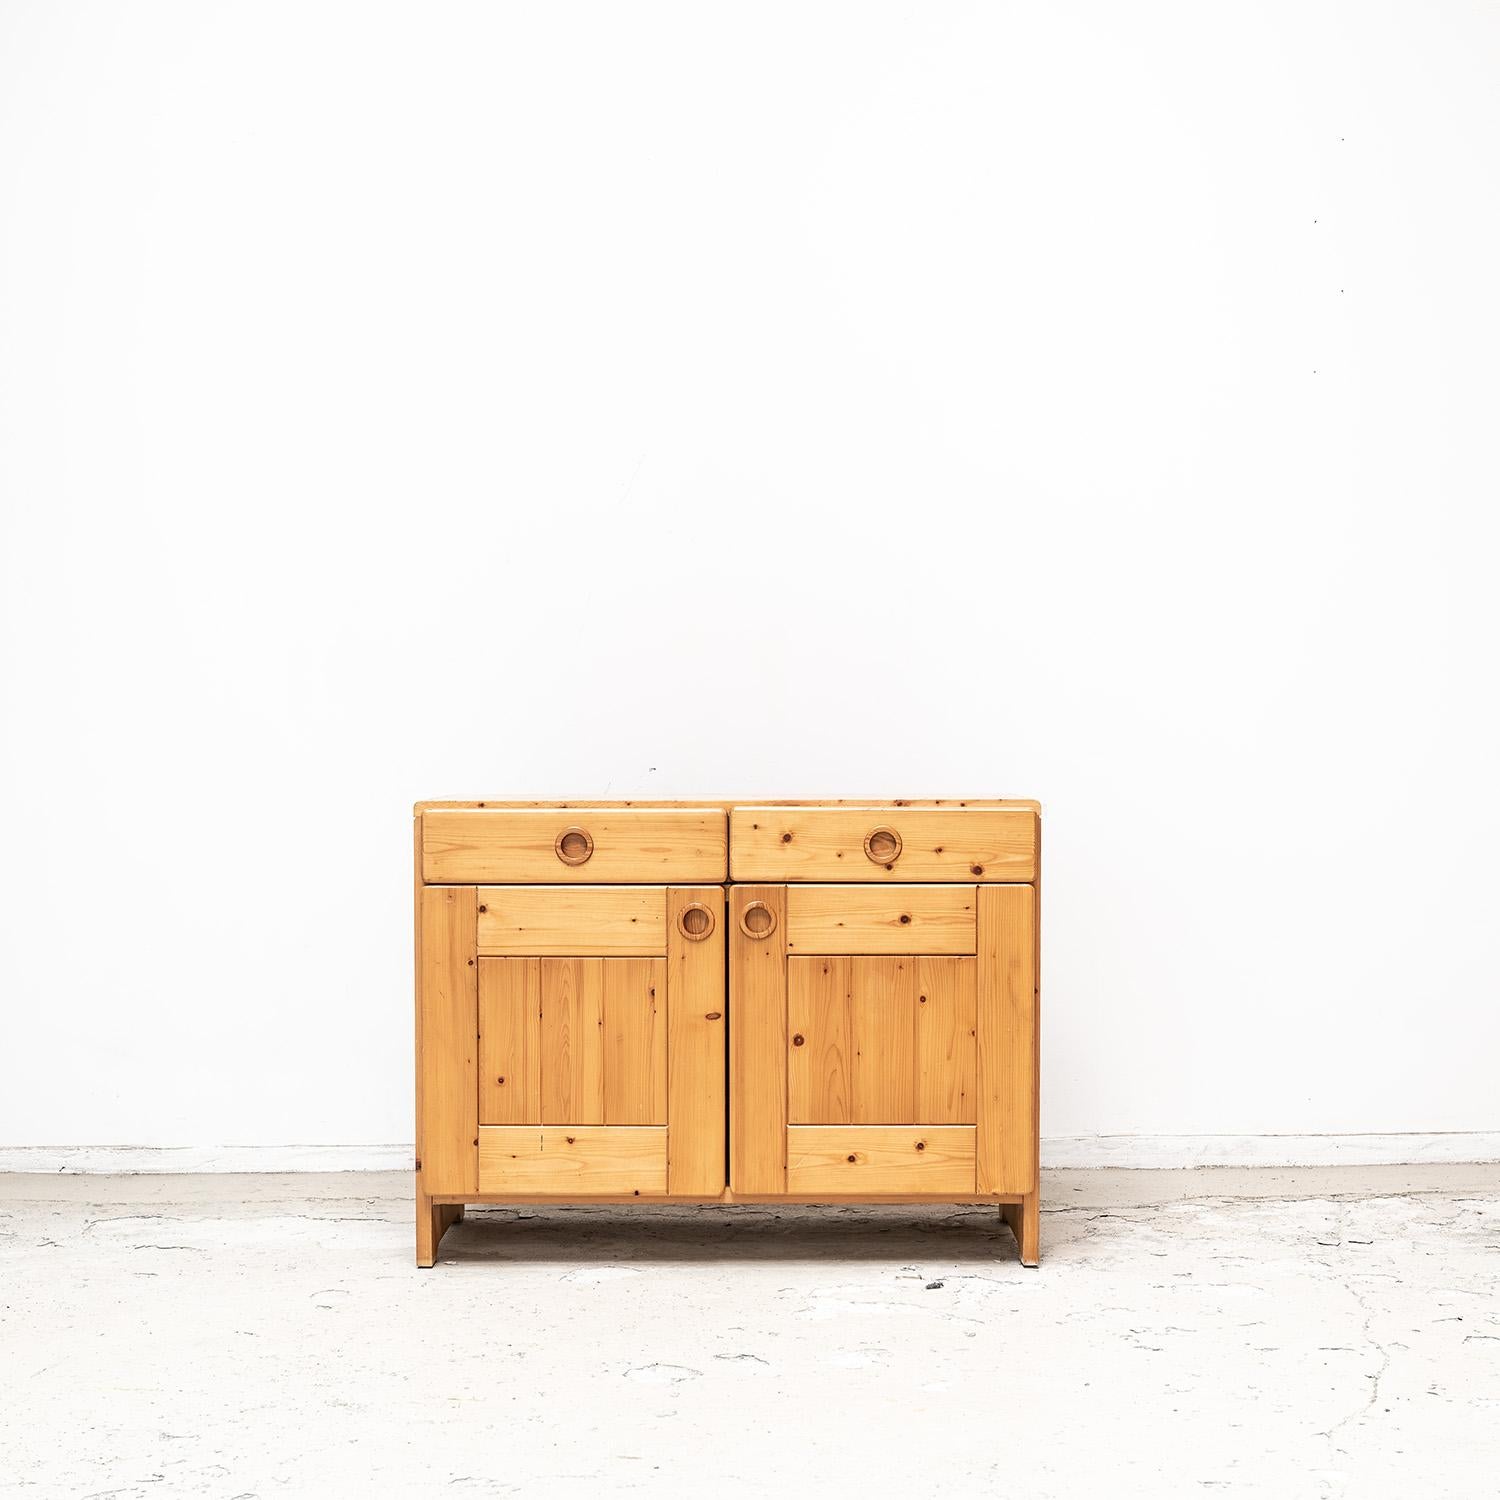 This cabinet was used in Les Arcs 1600. Material is pine wood. 

Charlotte Perriand oversaw the design team at Les Arcs beginning in the late 1960s and with the progressive group, designed and built Arc 1600, Arc 1800 and Arc 2000 at the resort. The